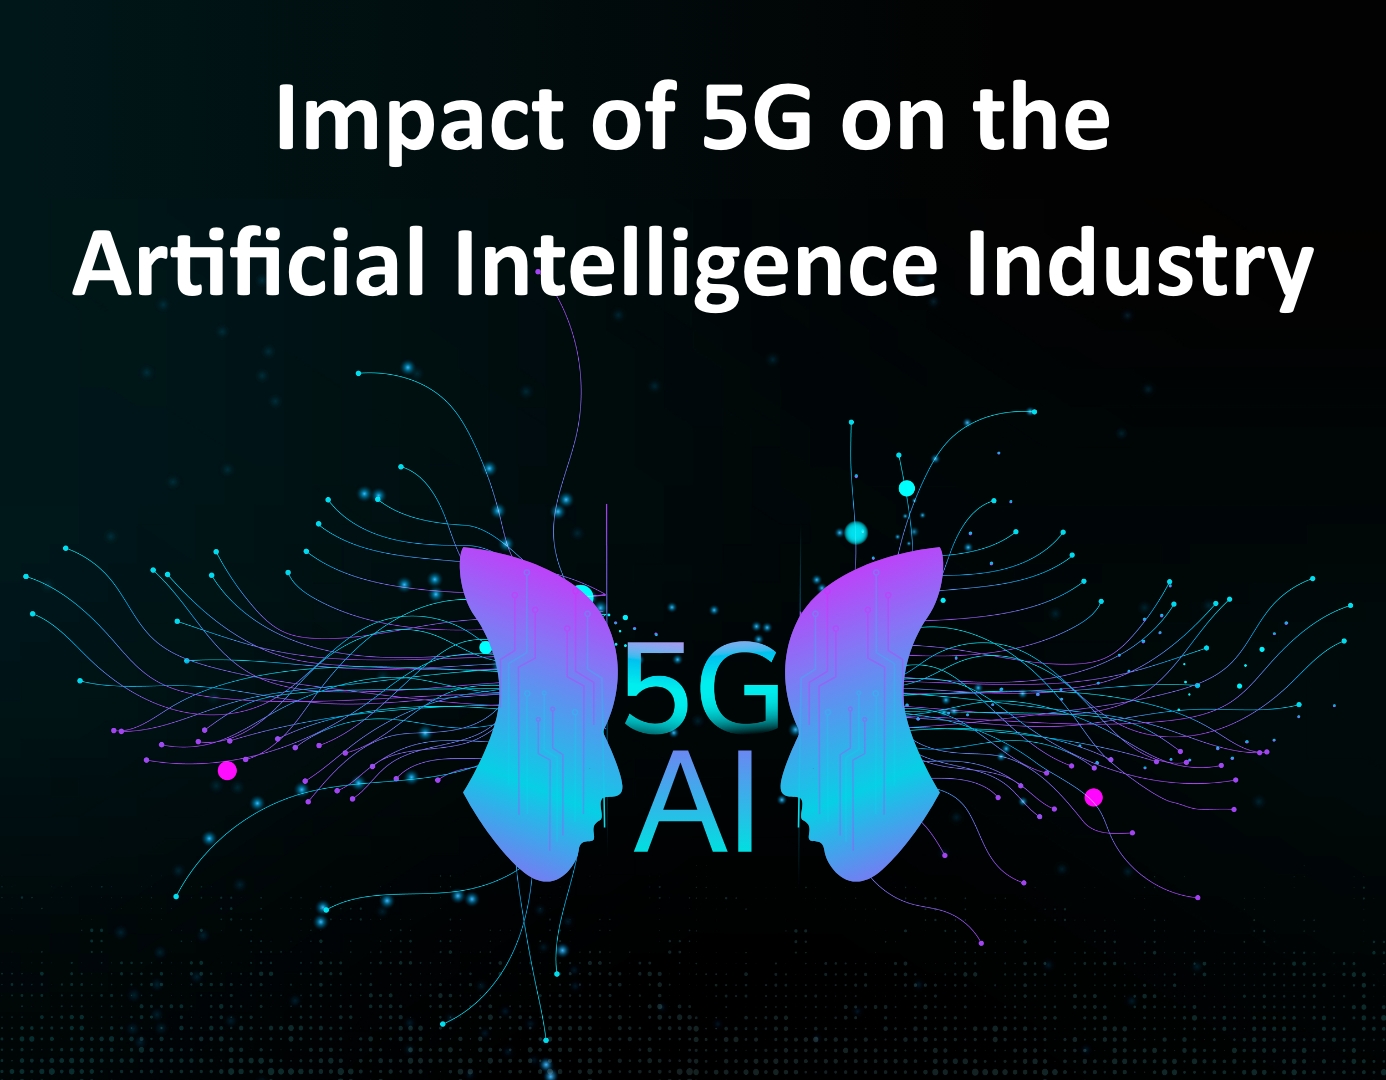 Impact of 5G on the Artificial Intelligence Industry